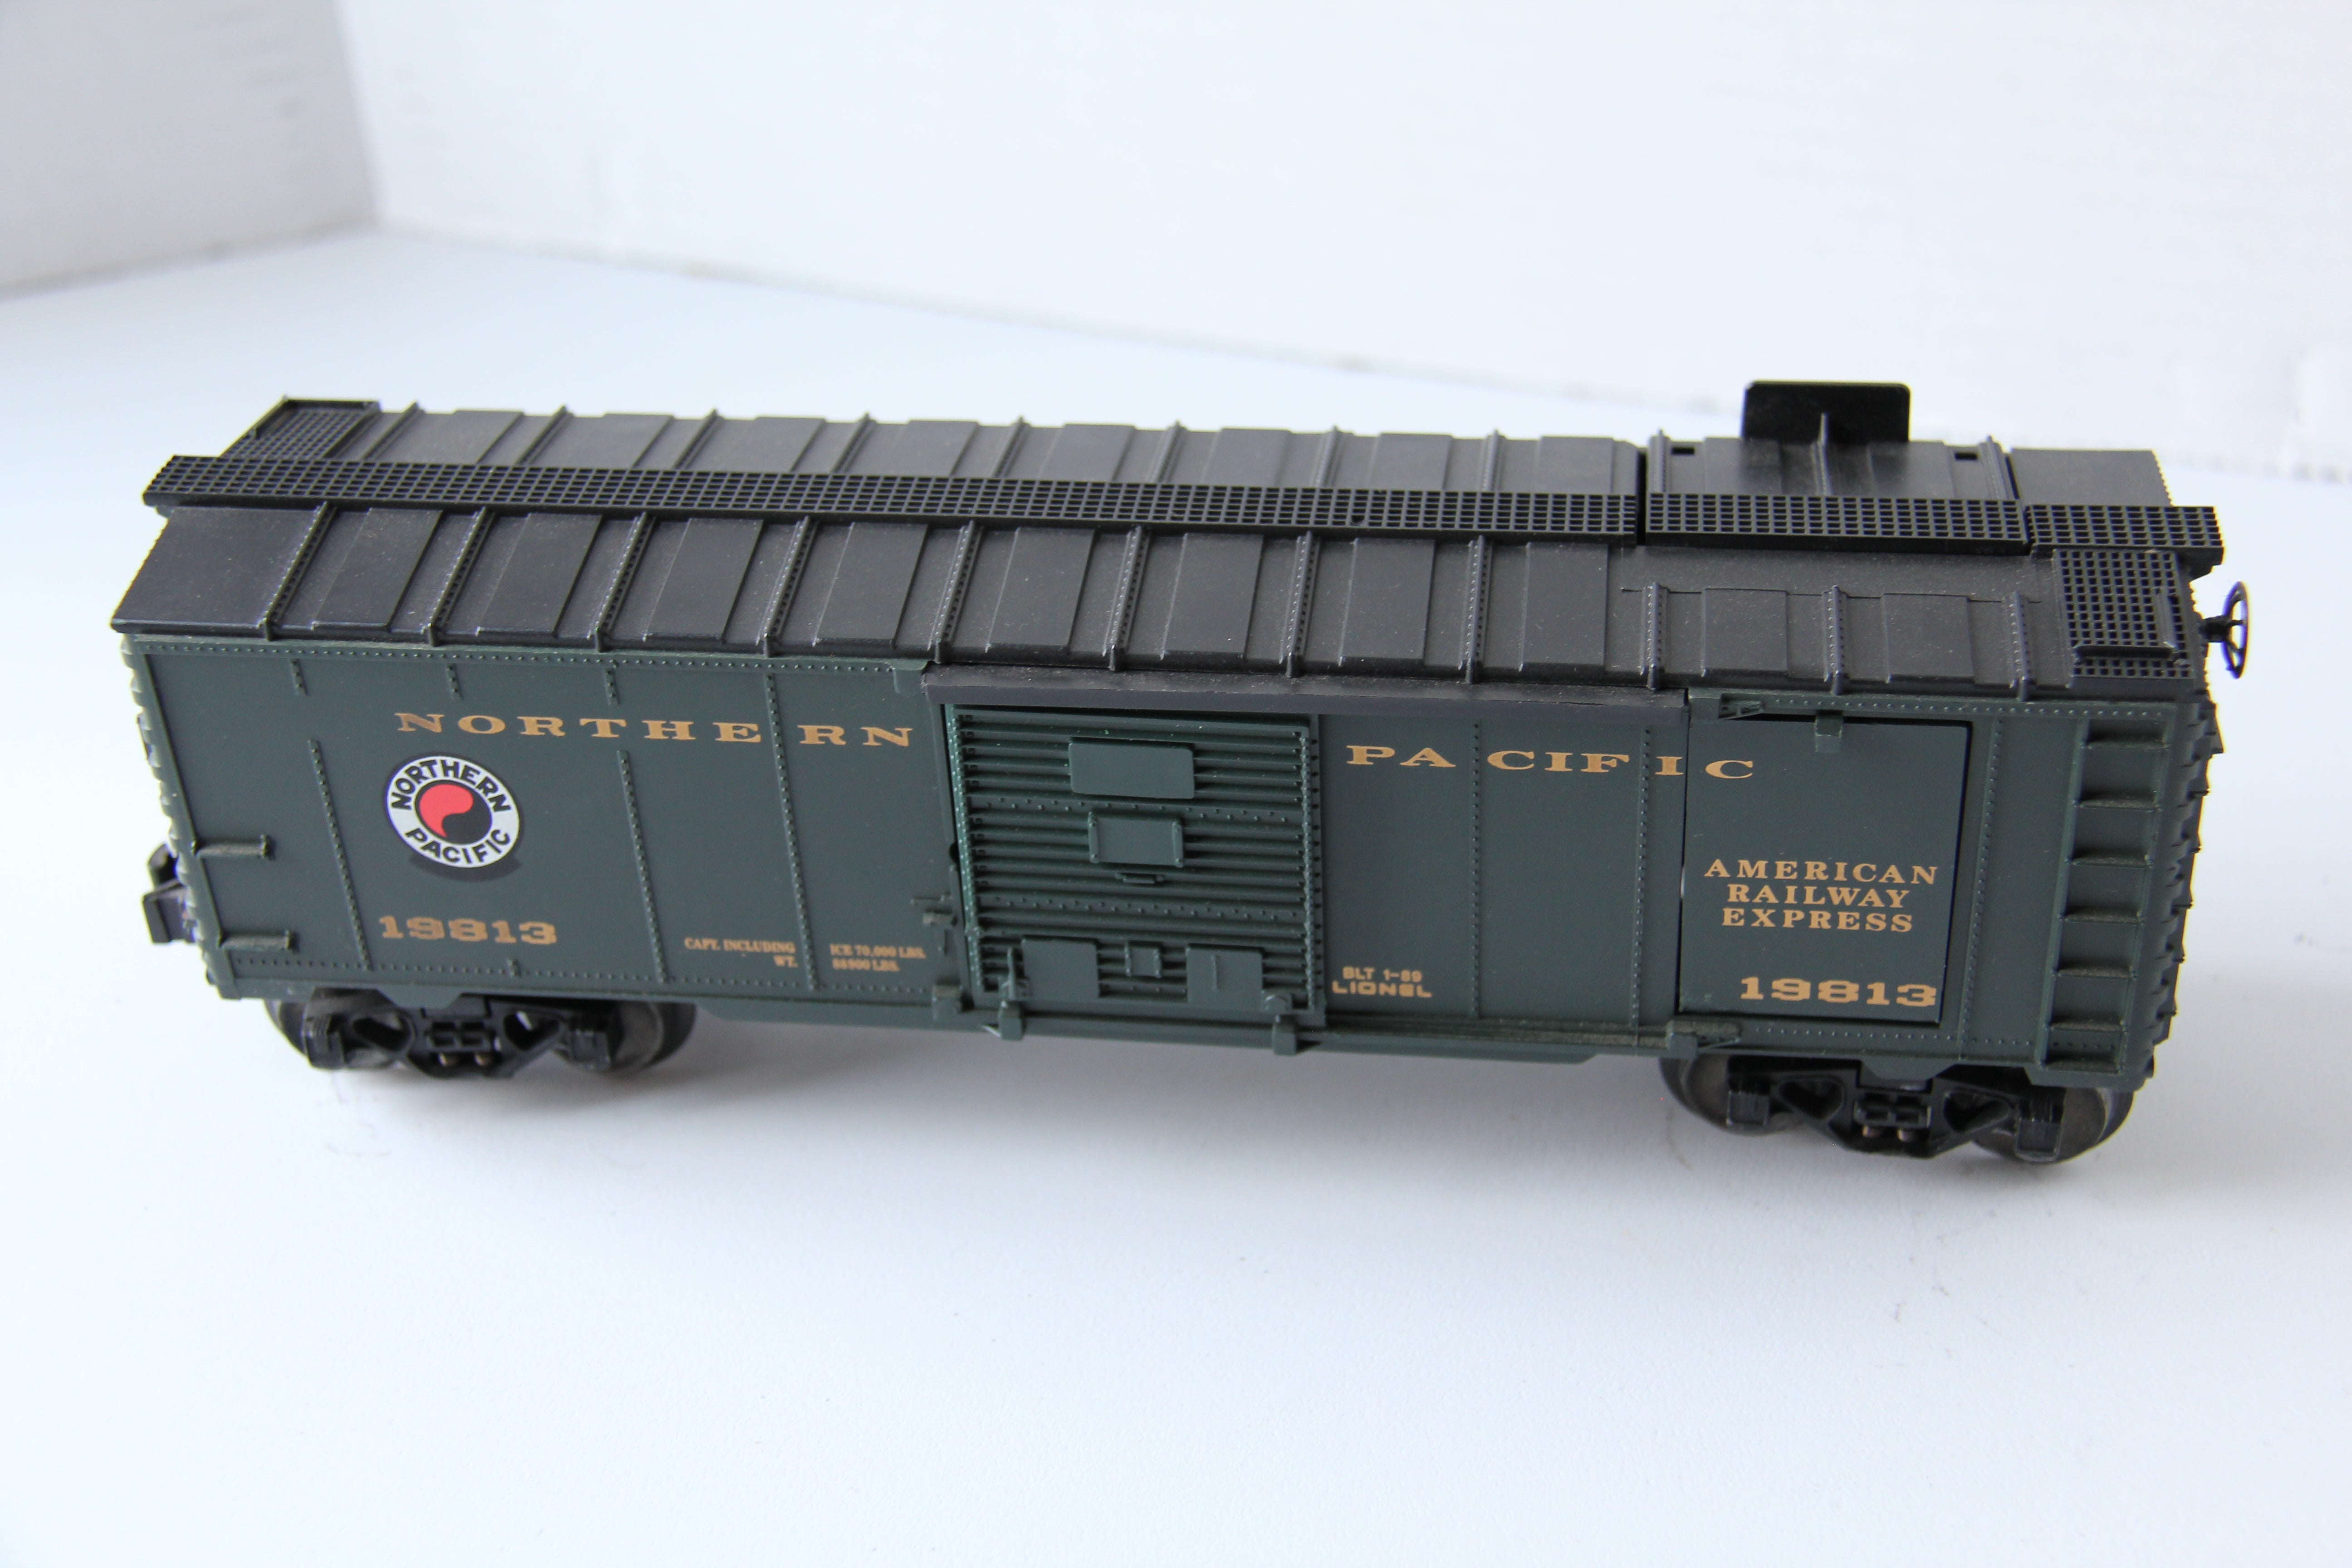 Lionel 6-19813 Northern Pacific Ice Car -Second hand-M2387